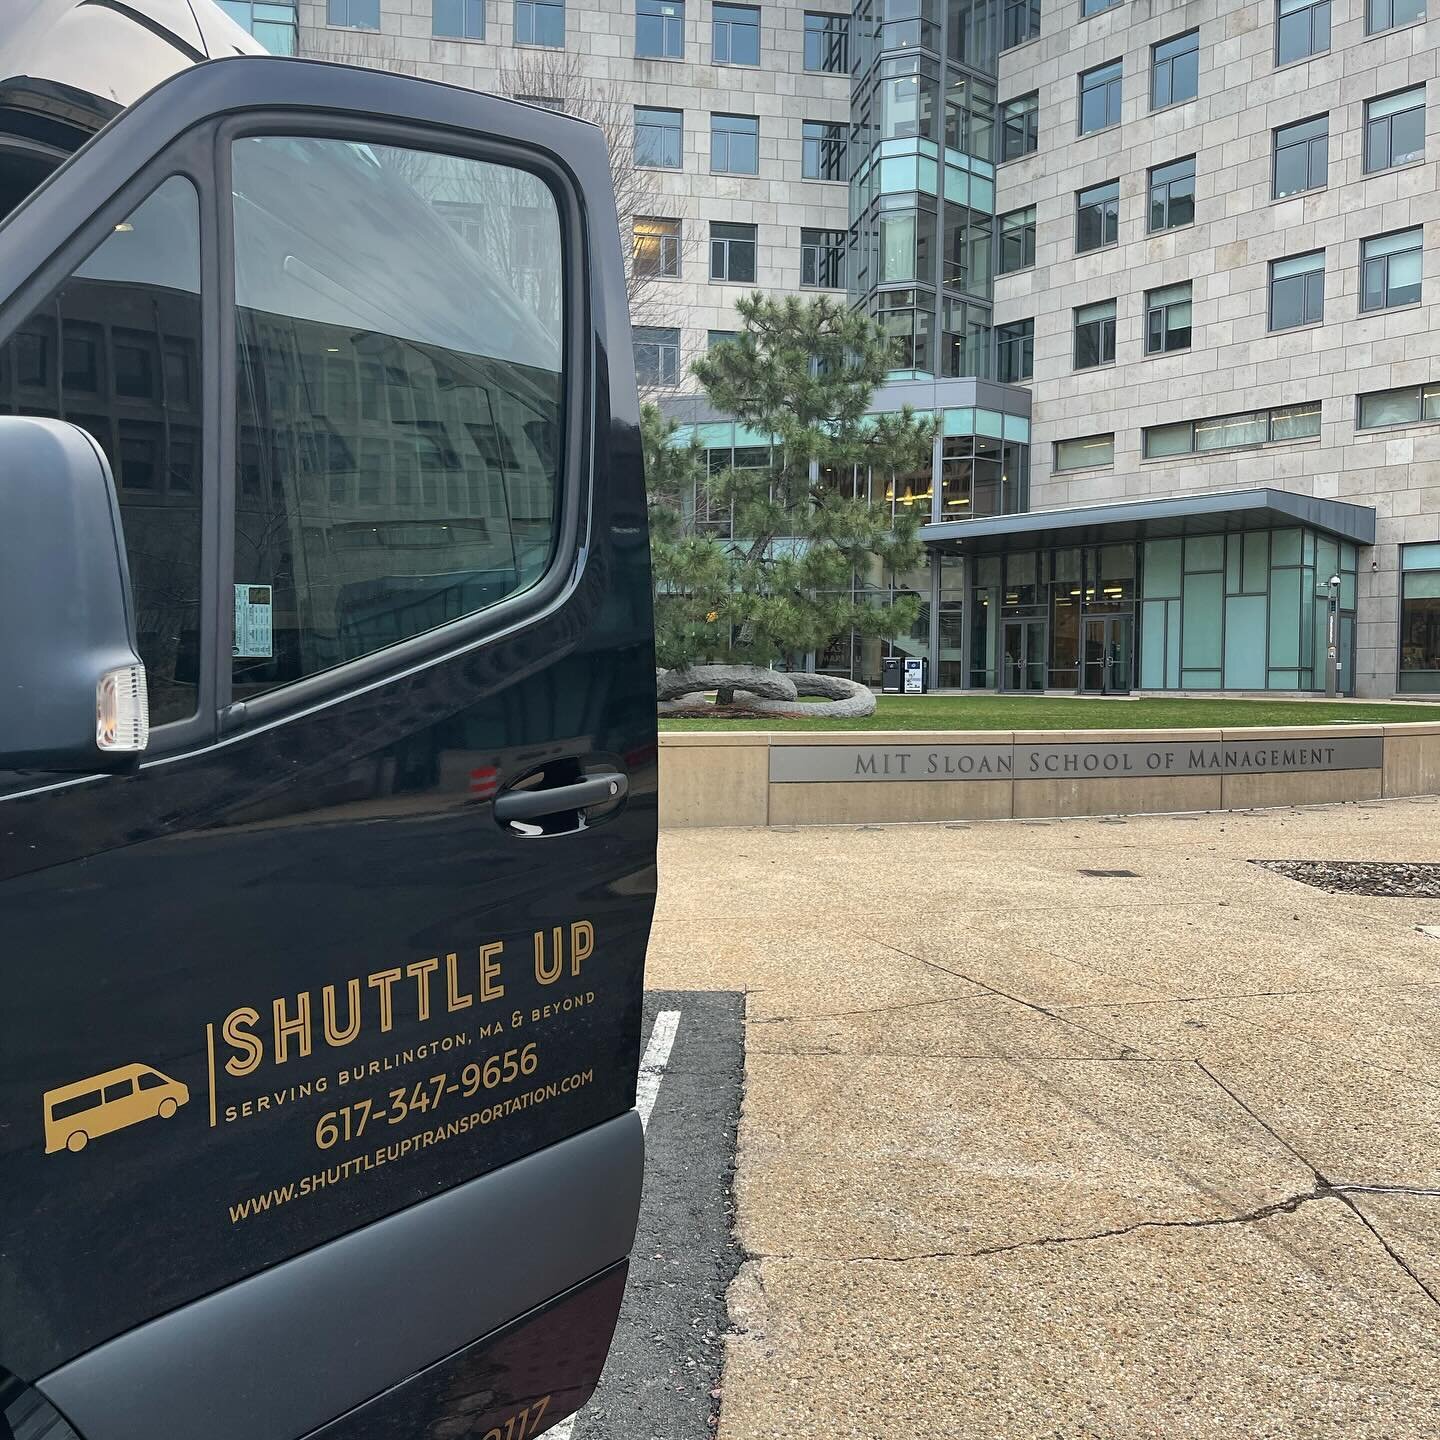 Yesterday&rsquo;s event at MIT was a success. 29 passengers in total, safely shuttled back and forth between Cambridge and  Boston.  #shuttleuptransportation #mit #cambridge #boston